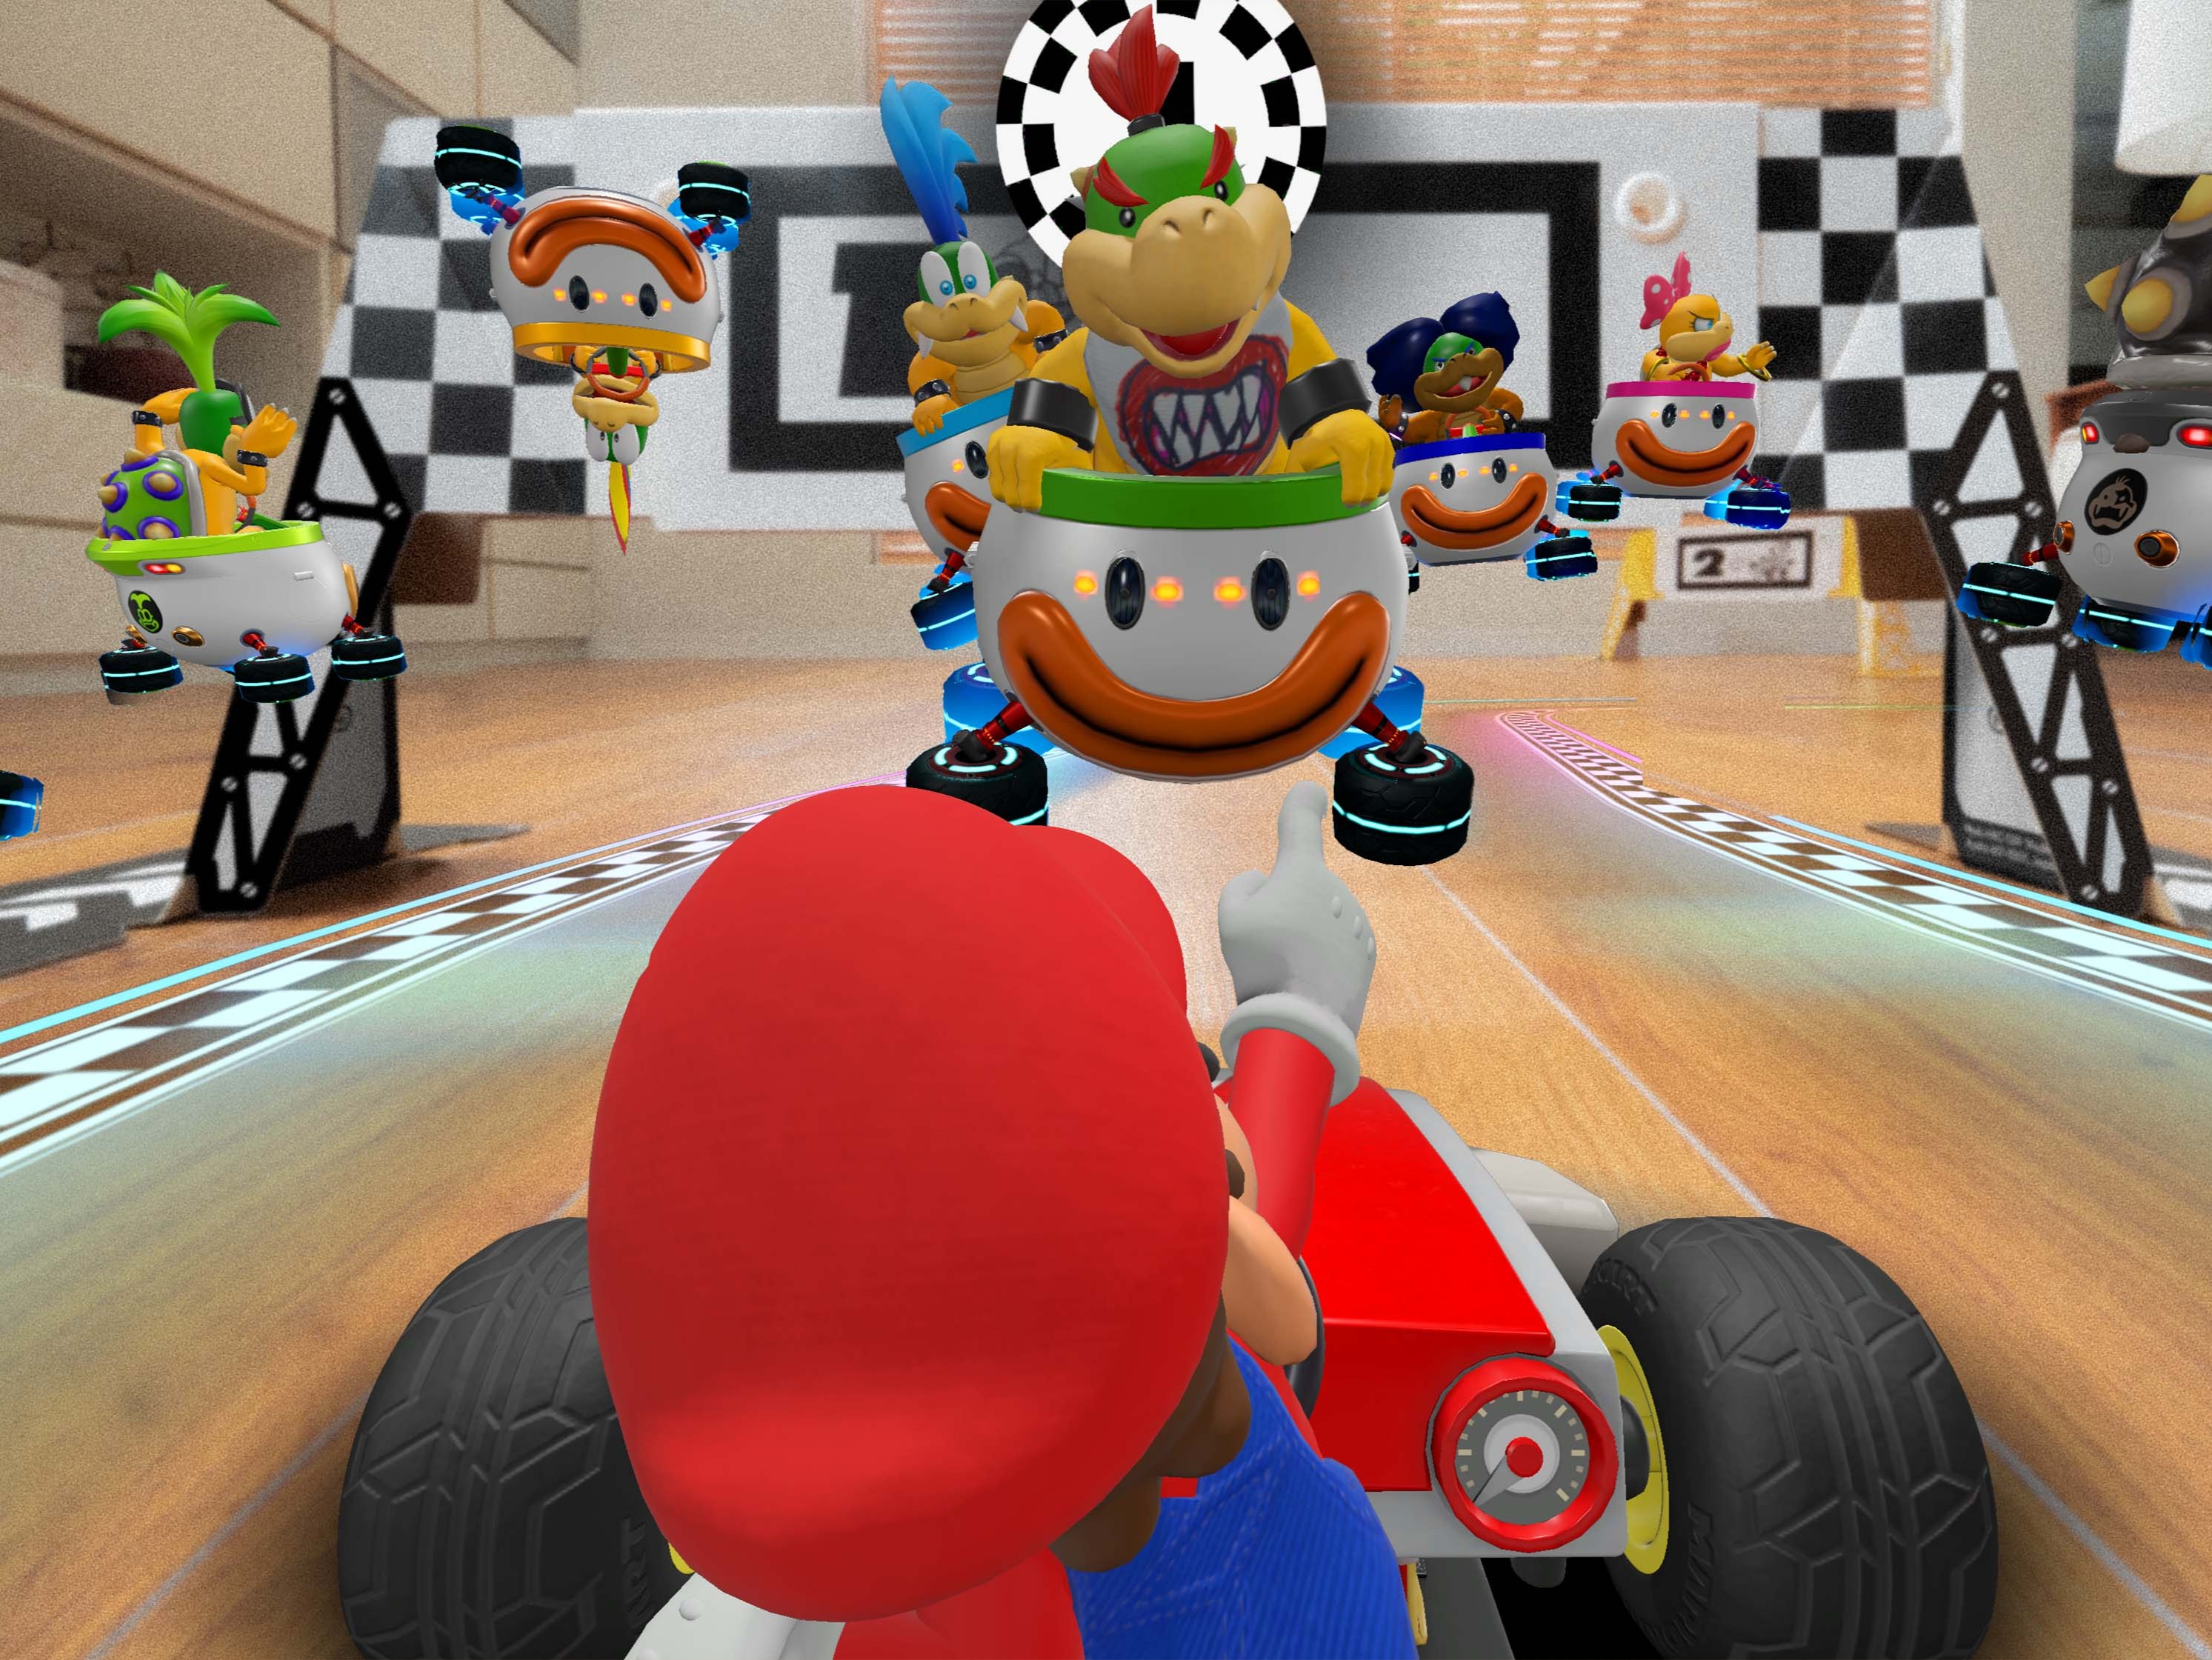 Mario’s car, racetrack and opponents overlay live footage of your living room